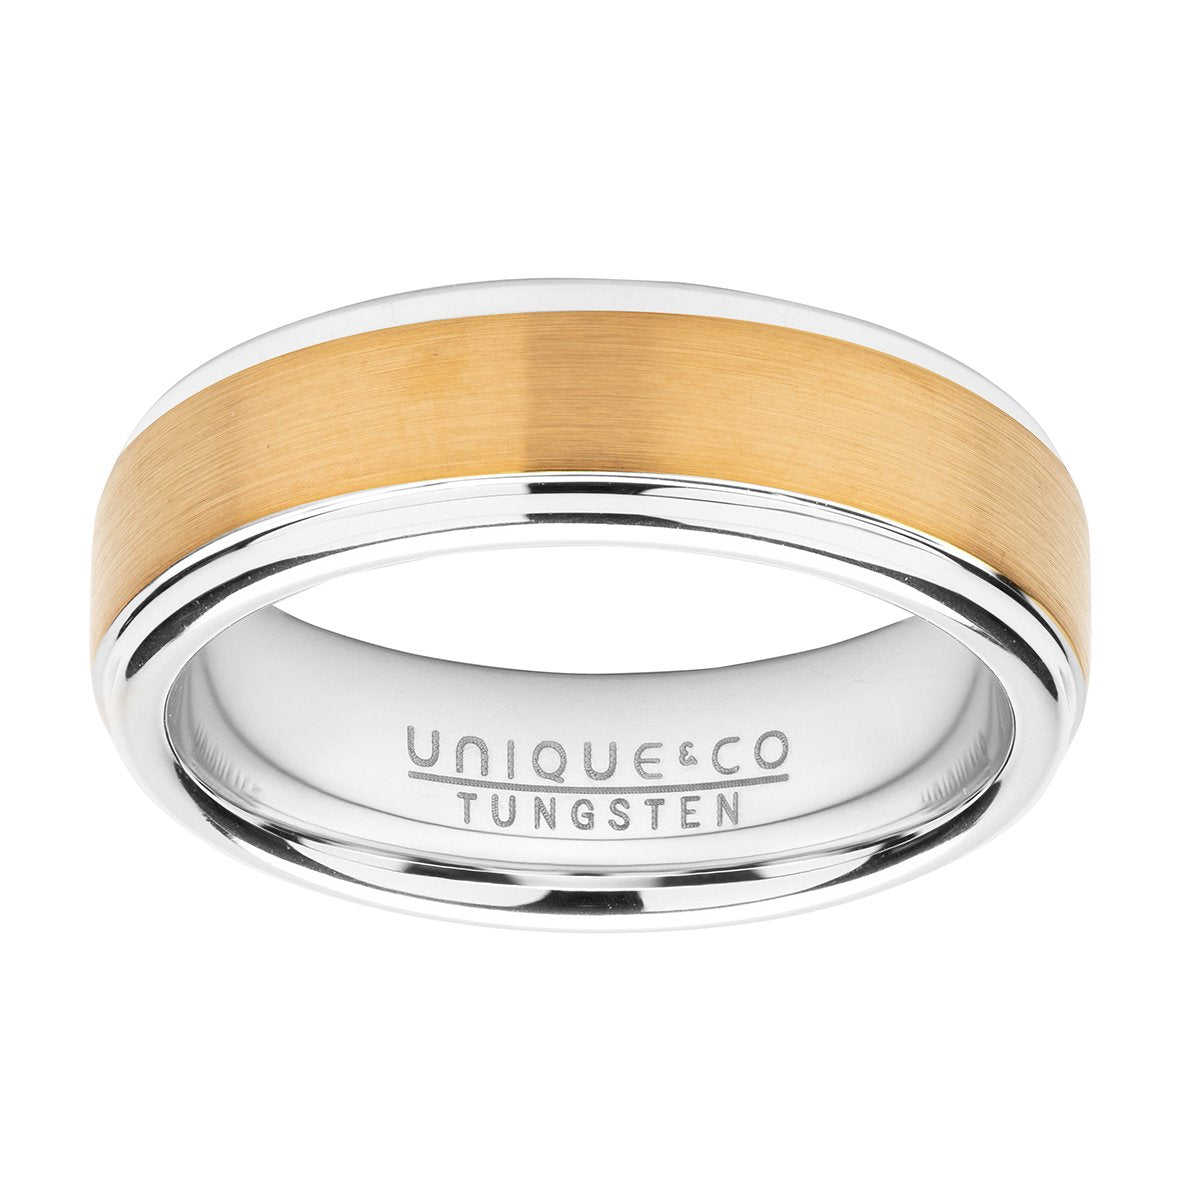 Tungsten 7mm Gold IP Plated Gents Wedding Ring